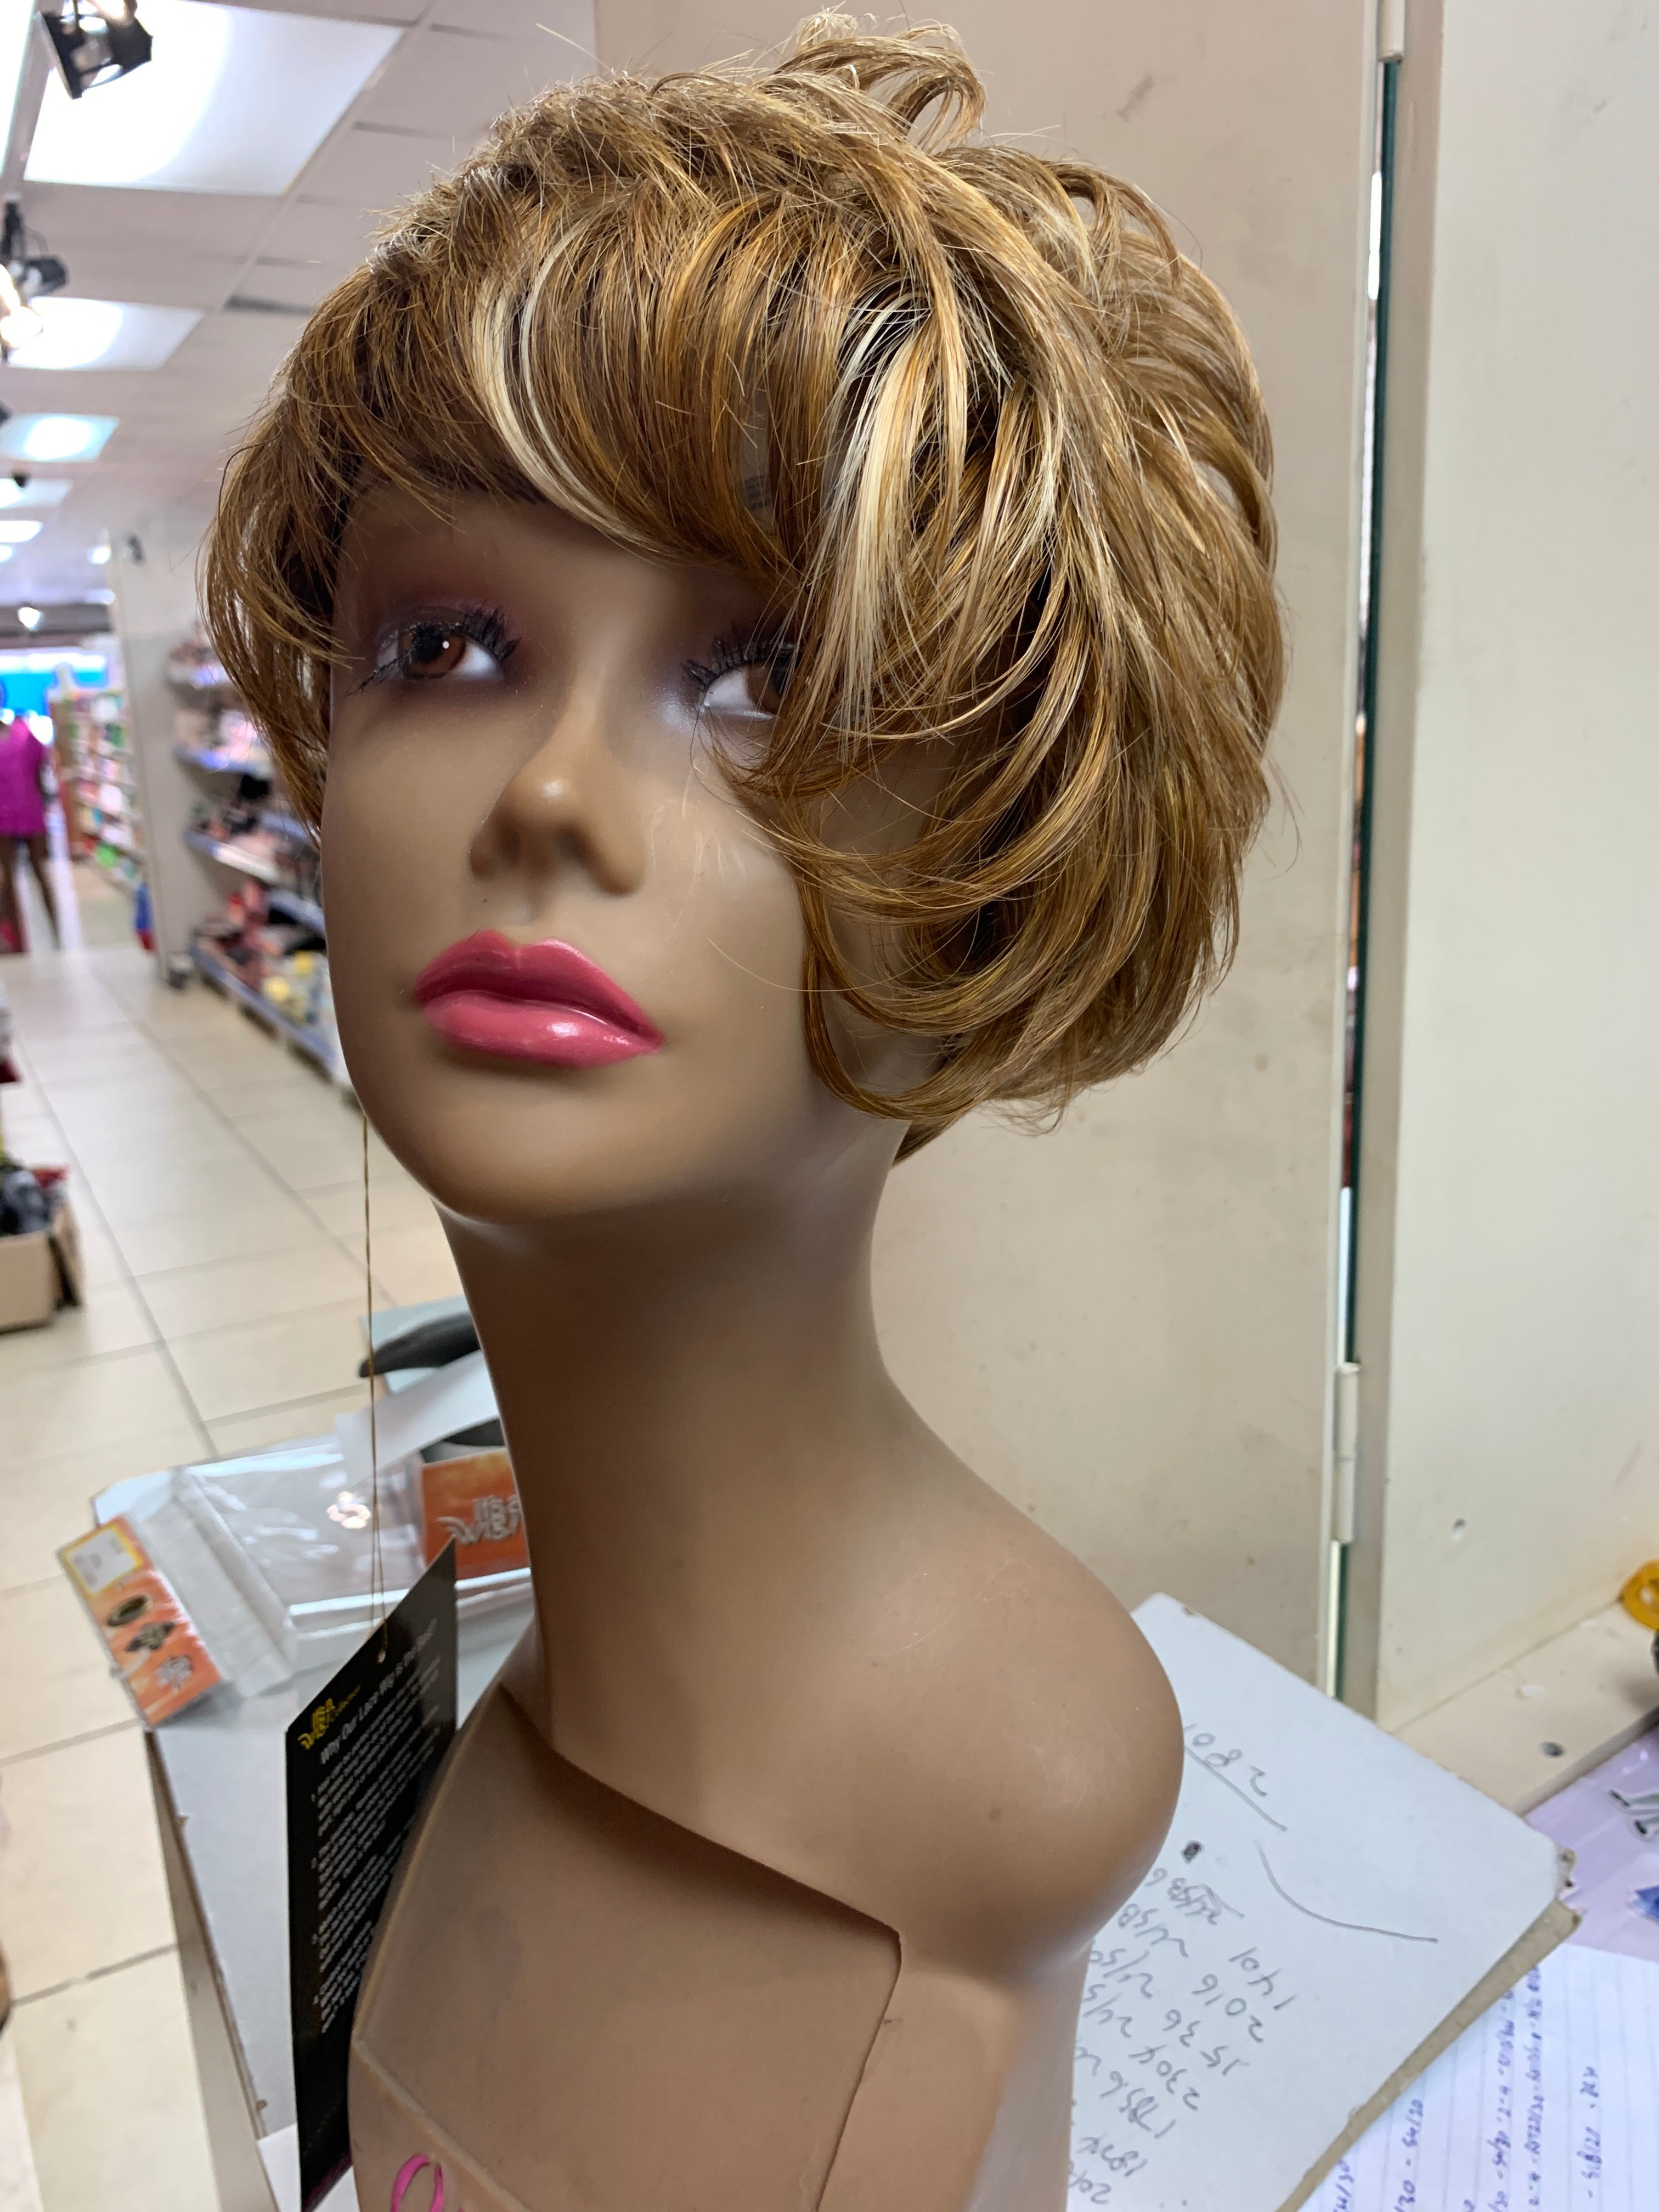 It’s a wig simply lace palm